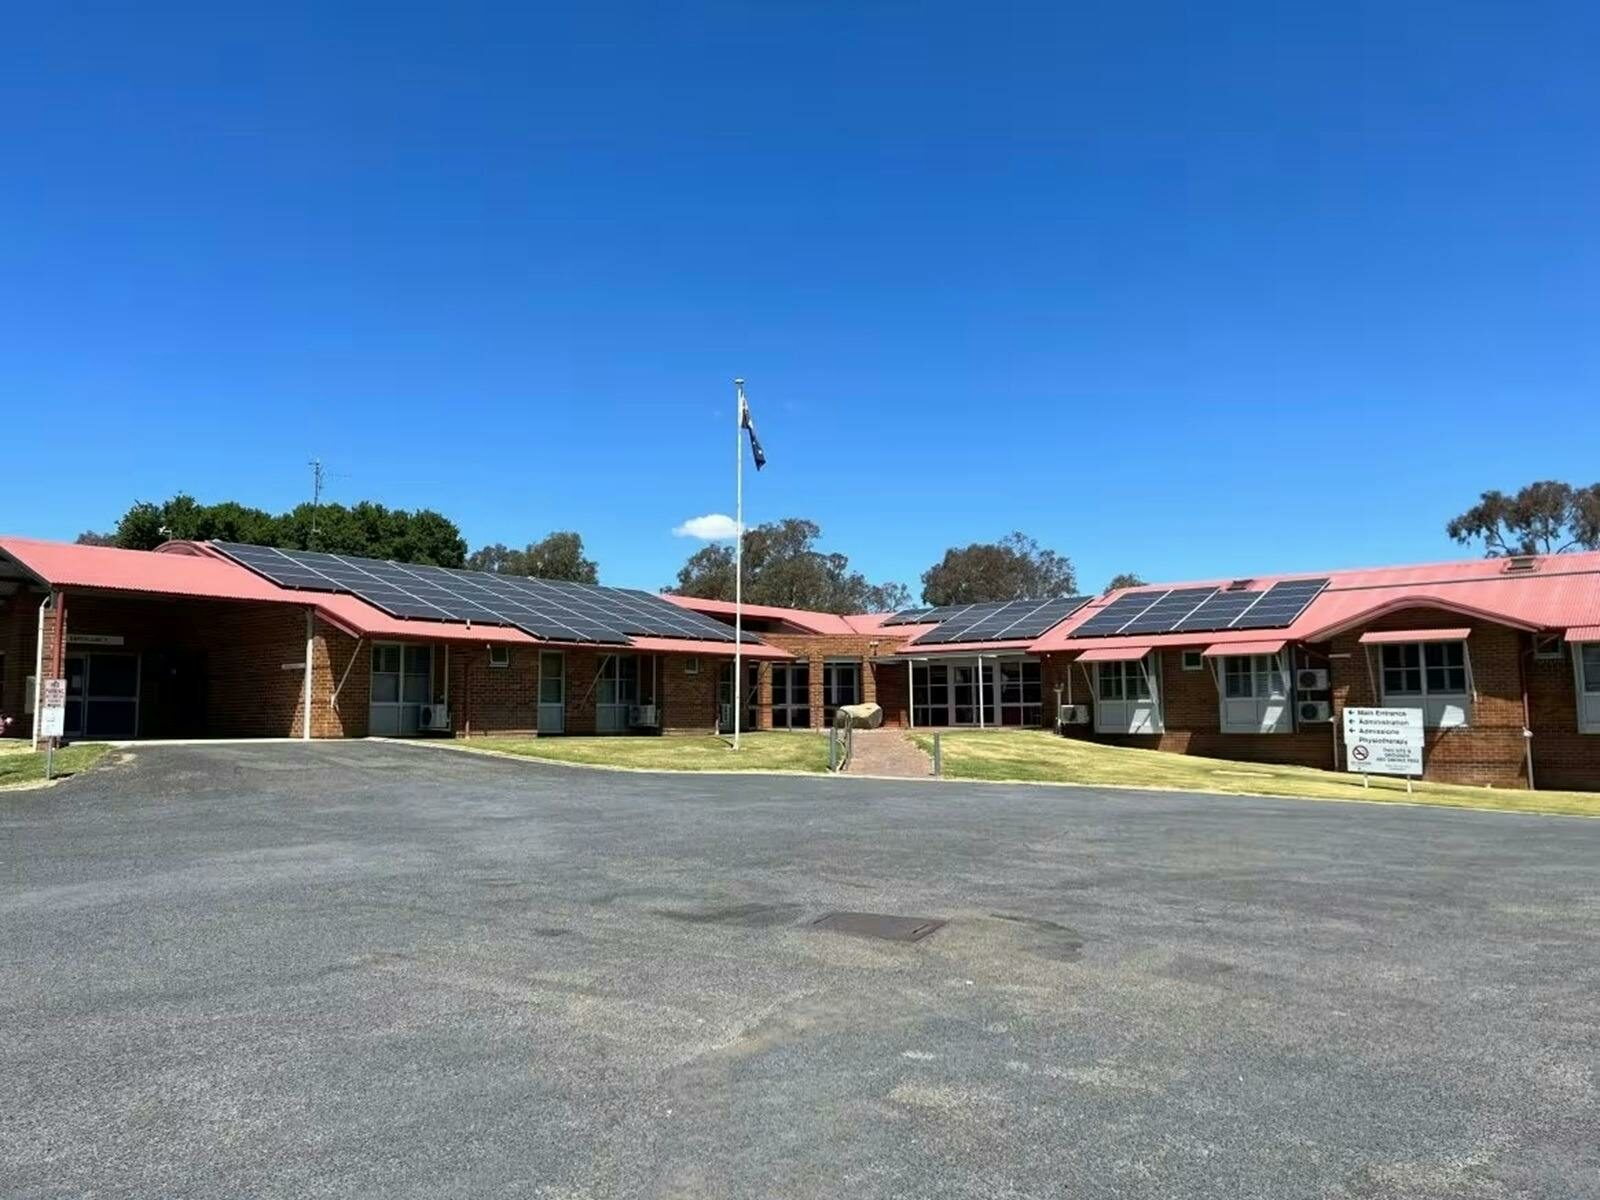 View of Boorowa Multipurpose Service building from the large car park.